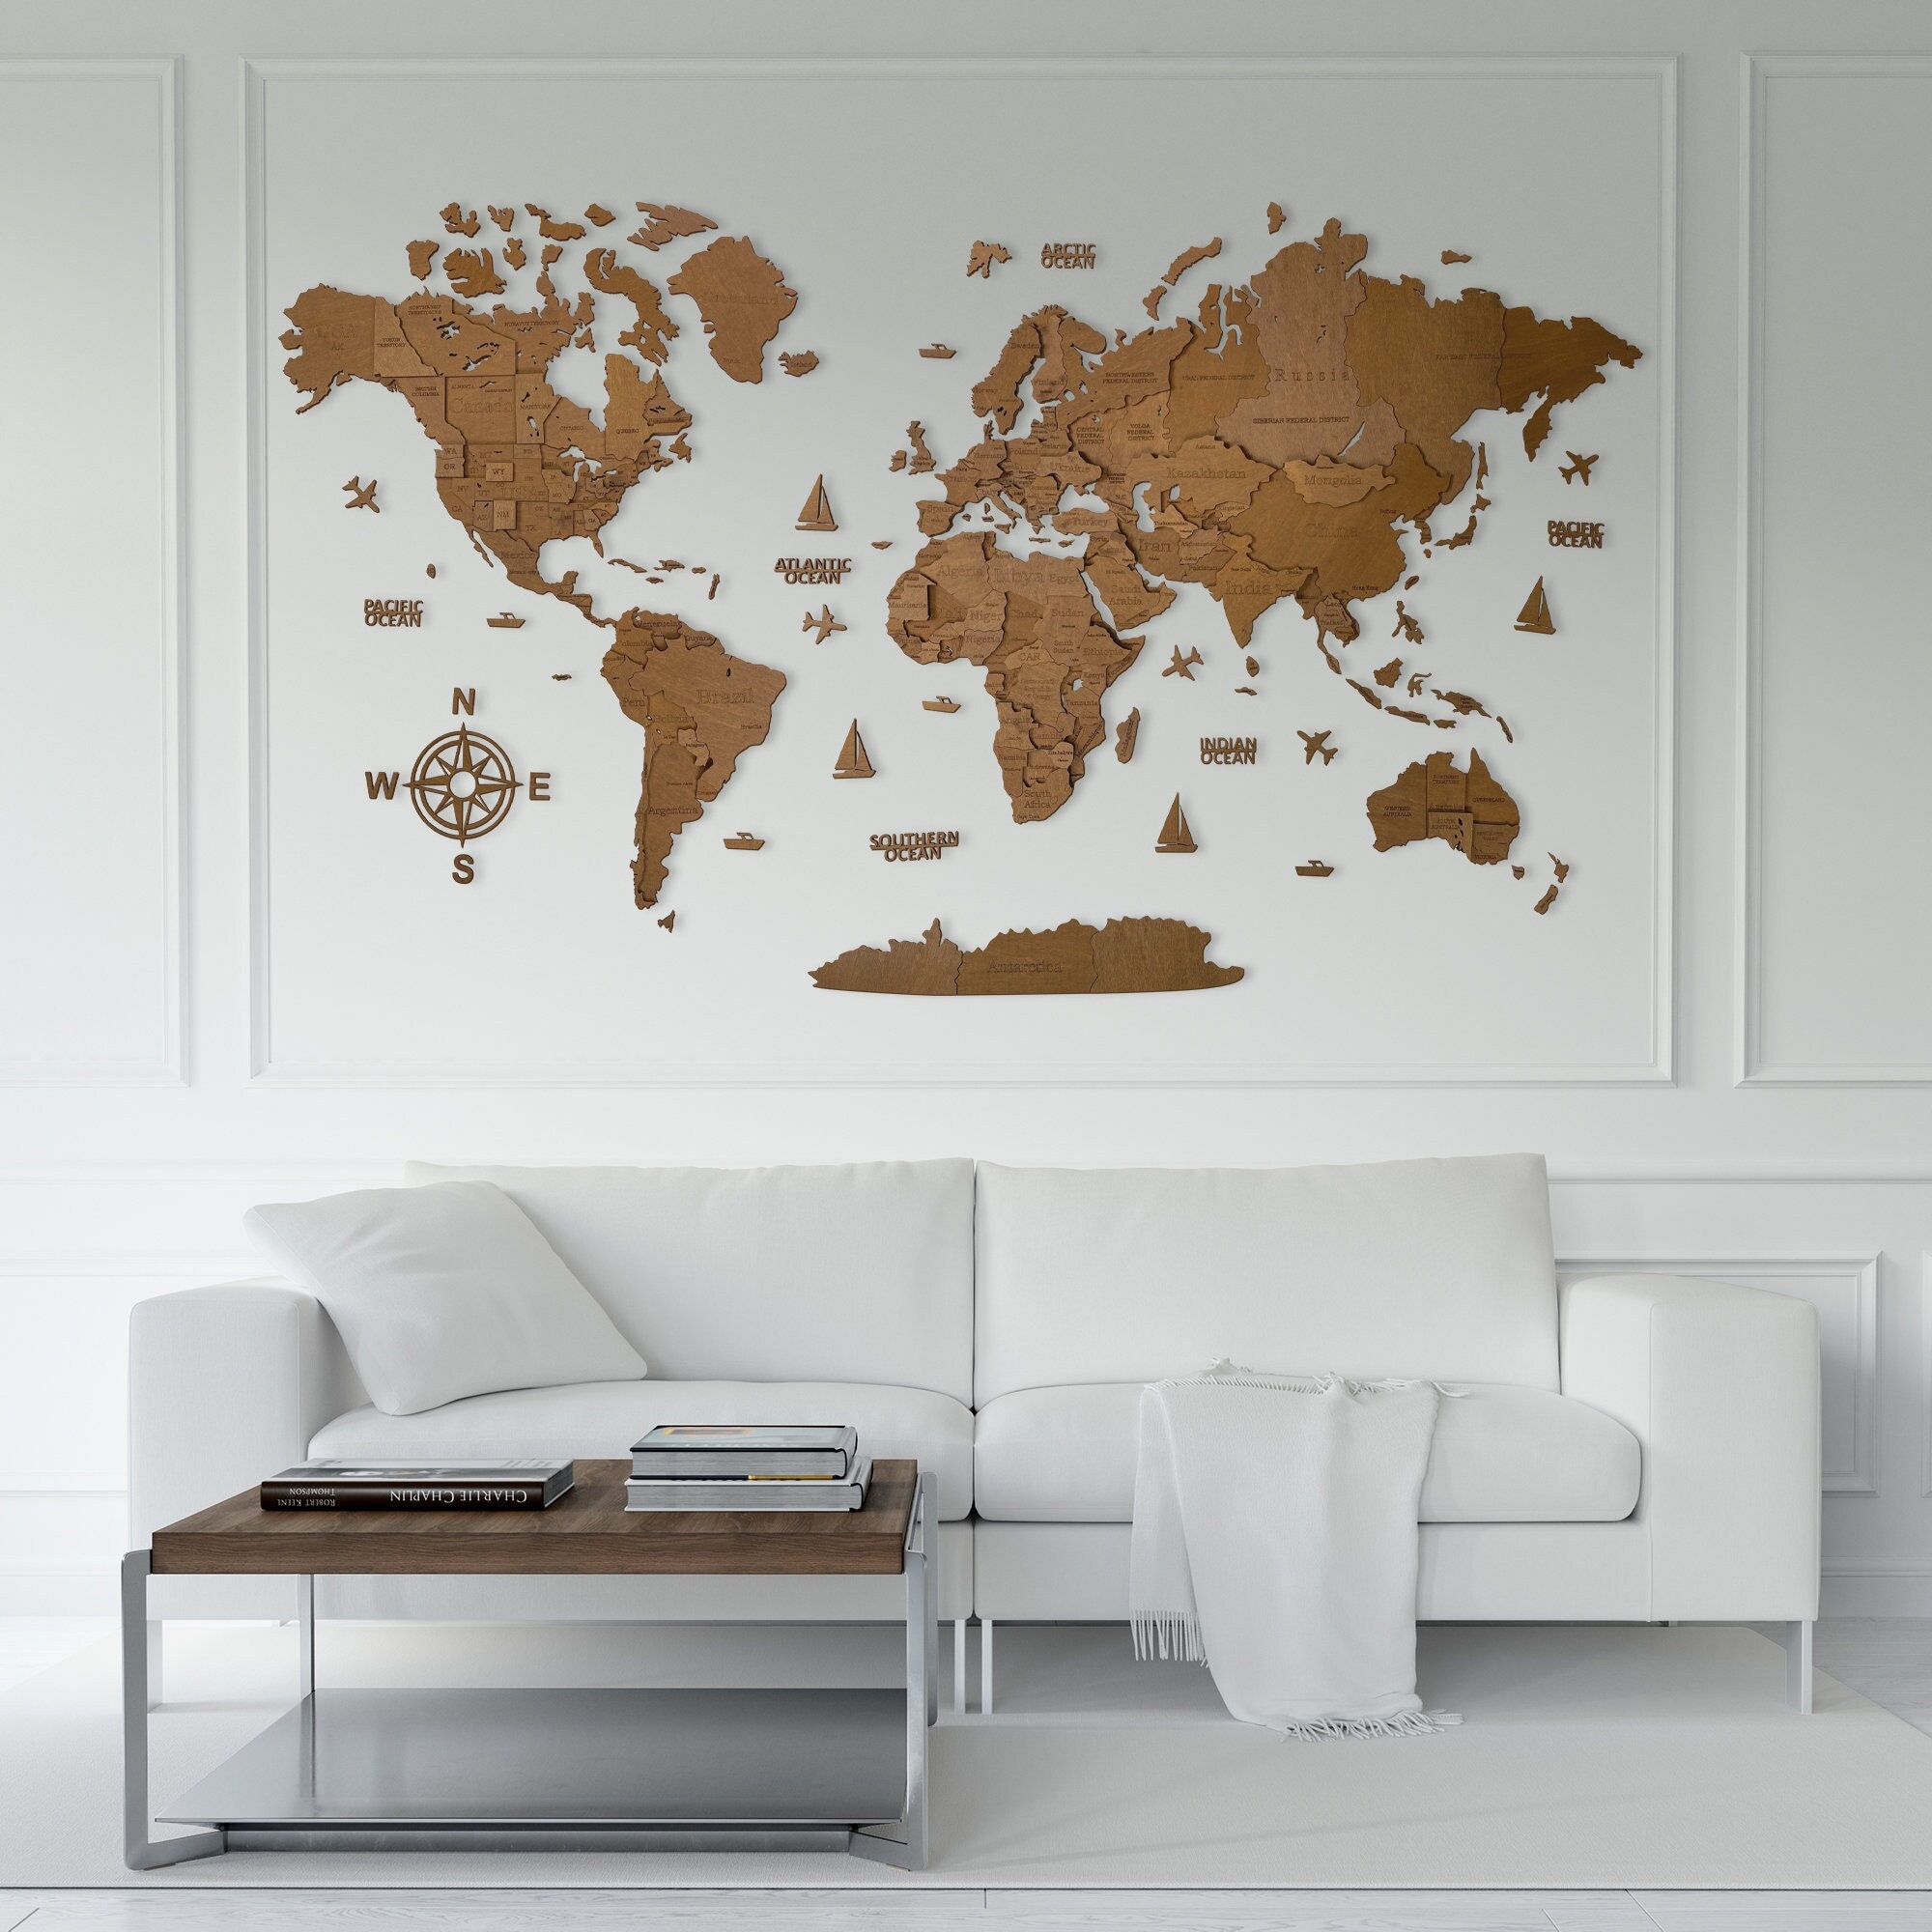 3D WOODEN WORLD WALL MAP SKY – WoodLeo